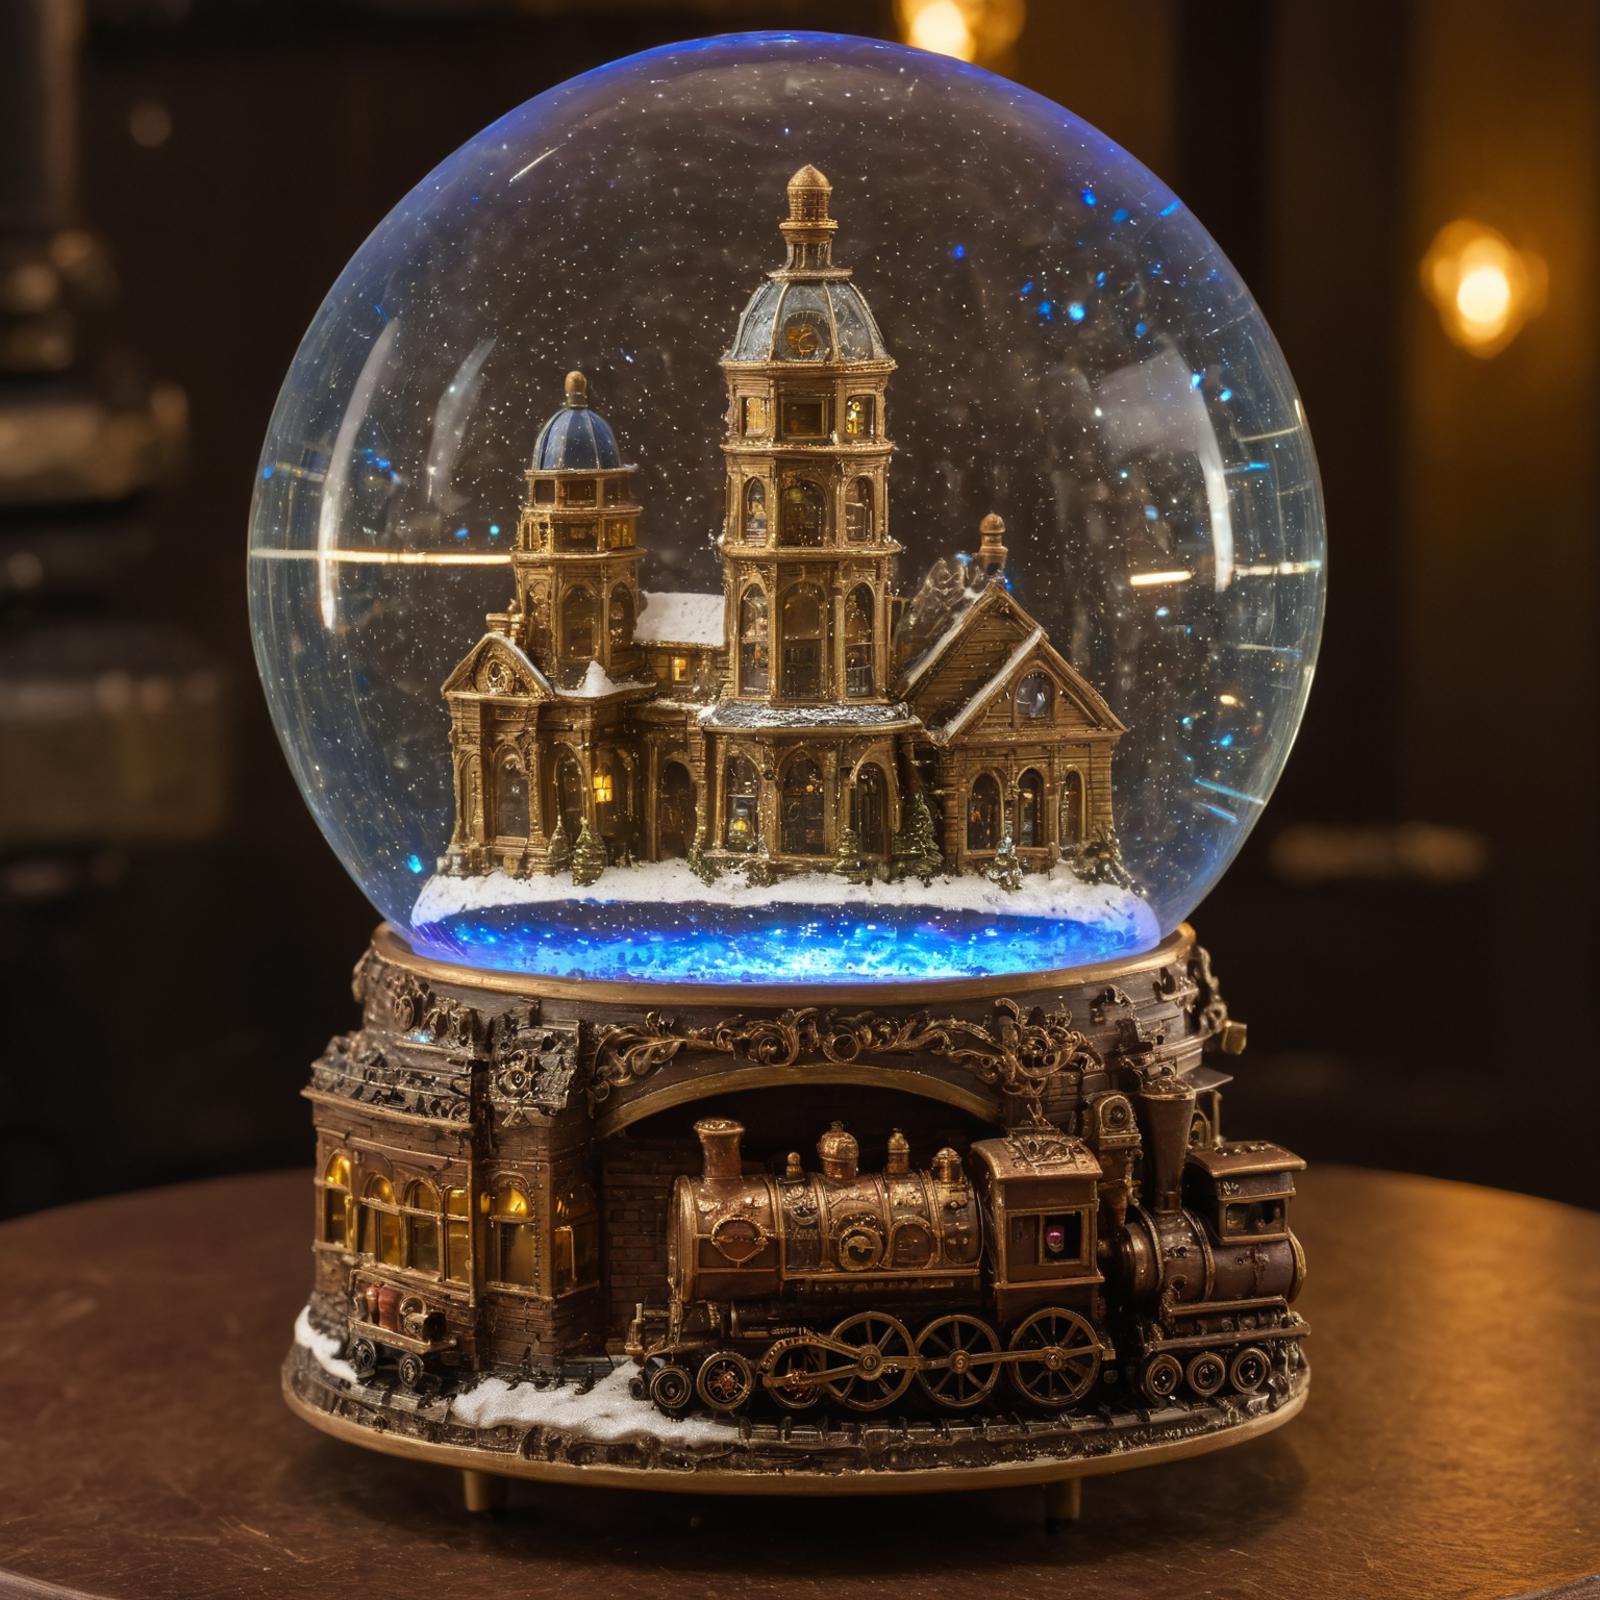 Snow Globes for SDXL image by artificialstupidity